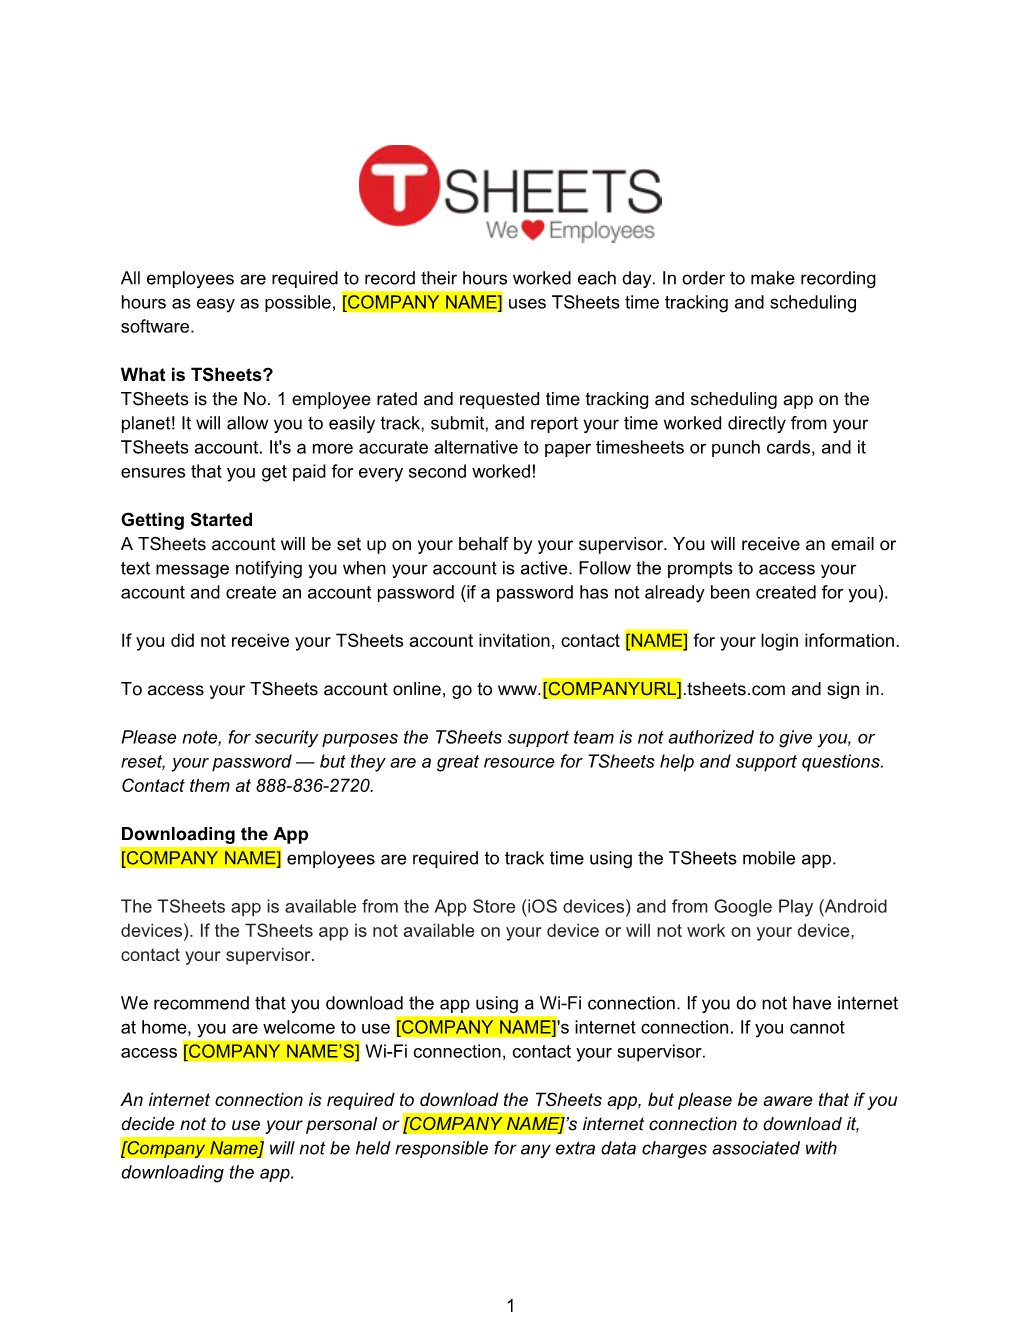 What Is Tsheets?